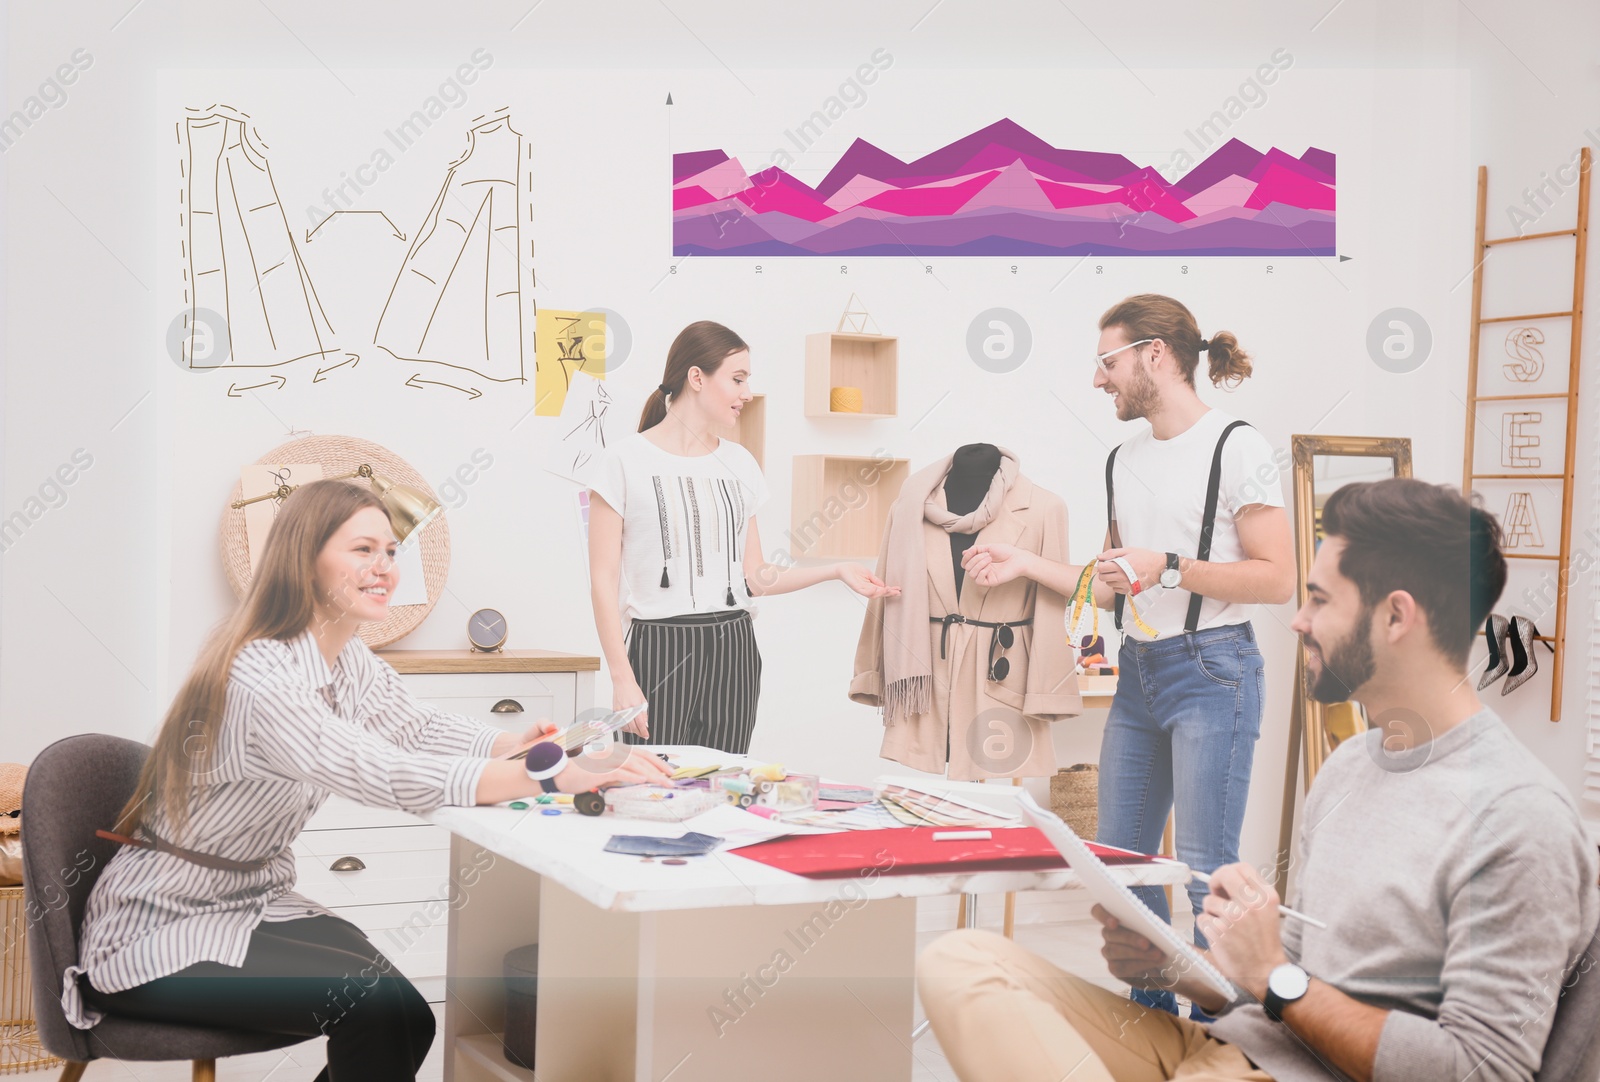 Image of Fashion designers creating new clothes in studio and illustration of colorful graphs 